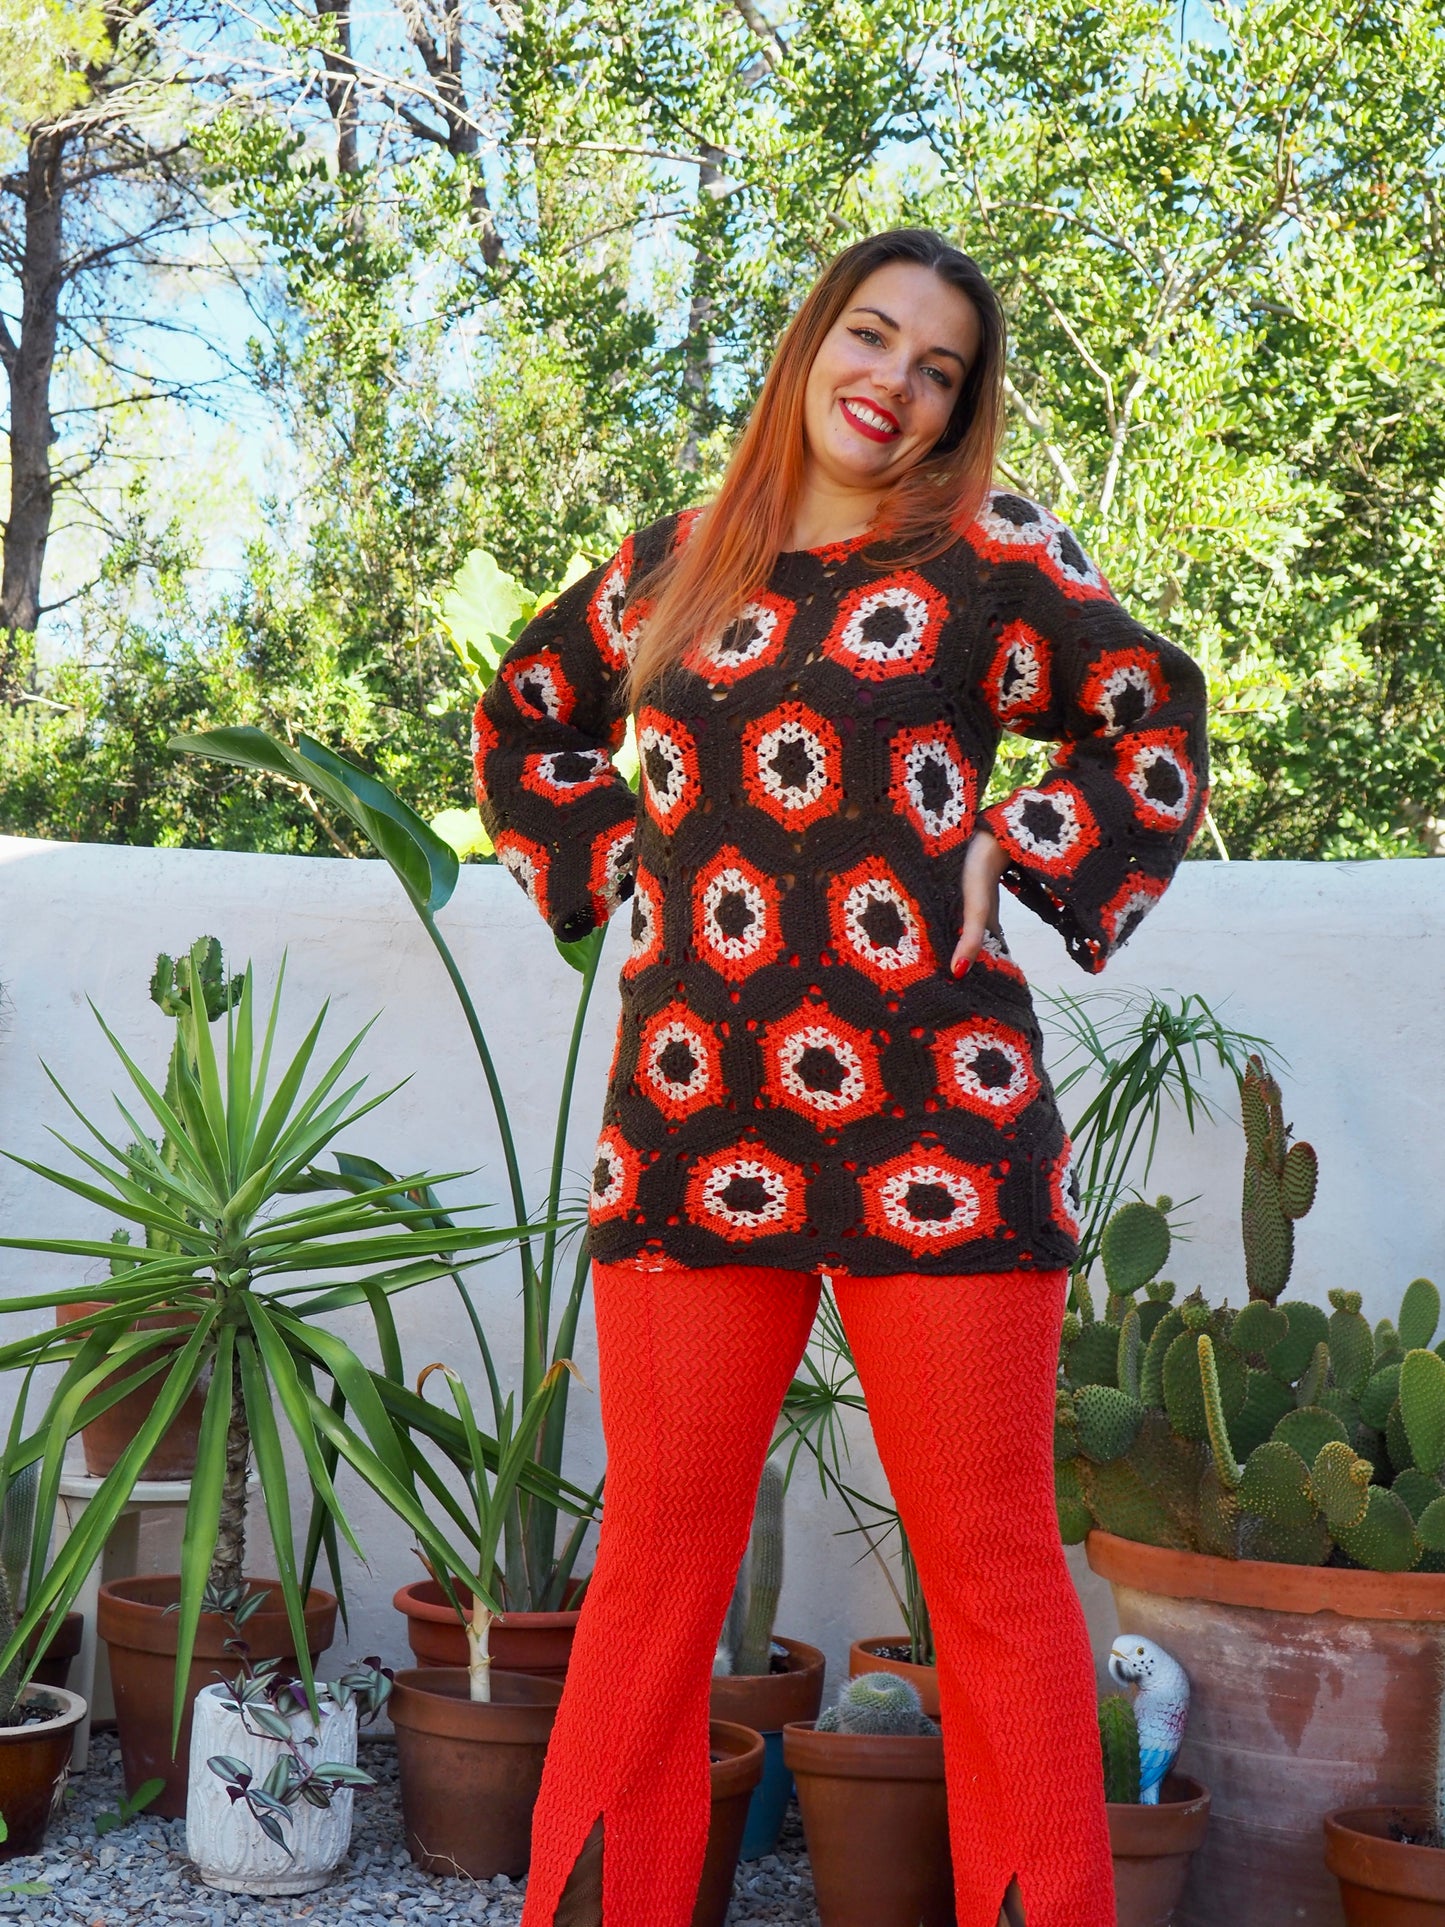 Vintage crochet orange and brown jumper dress up-cycled by Vagabond Ibiza